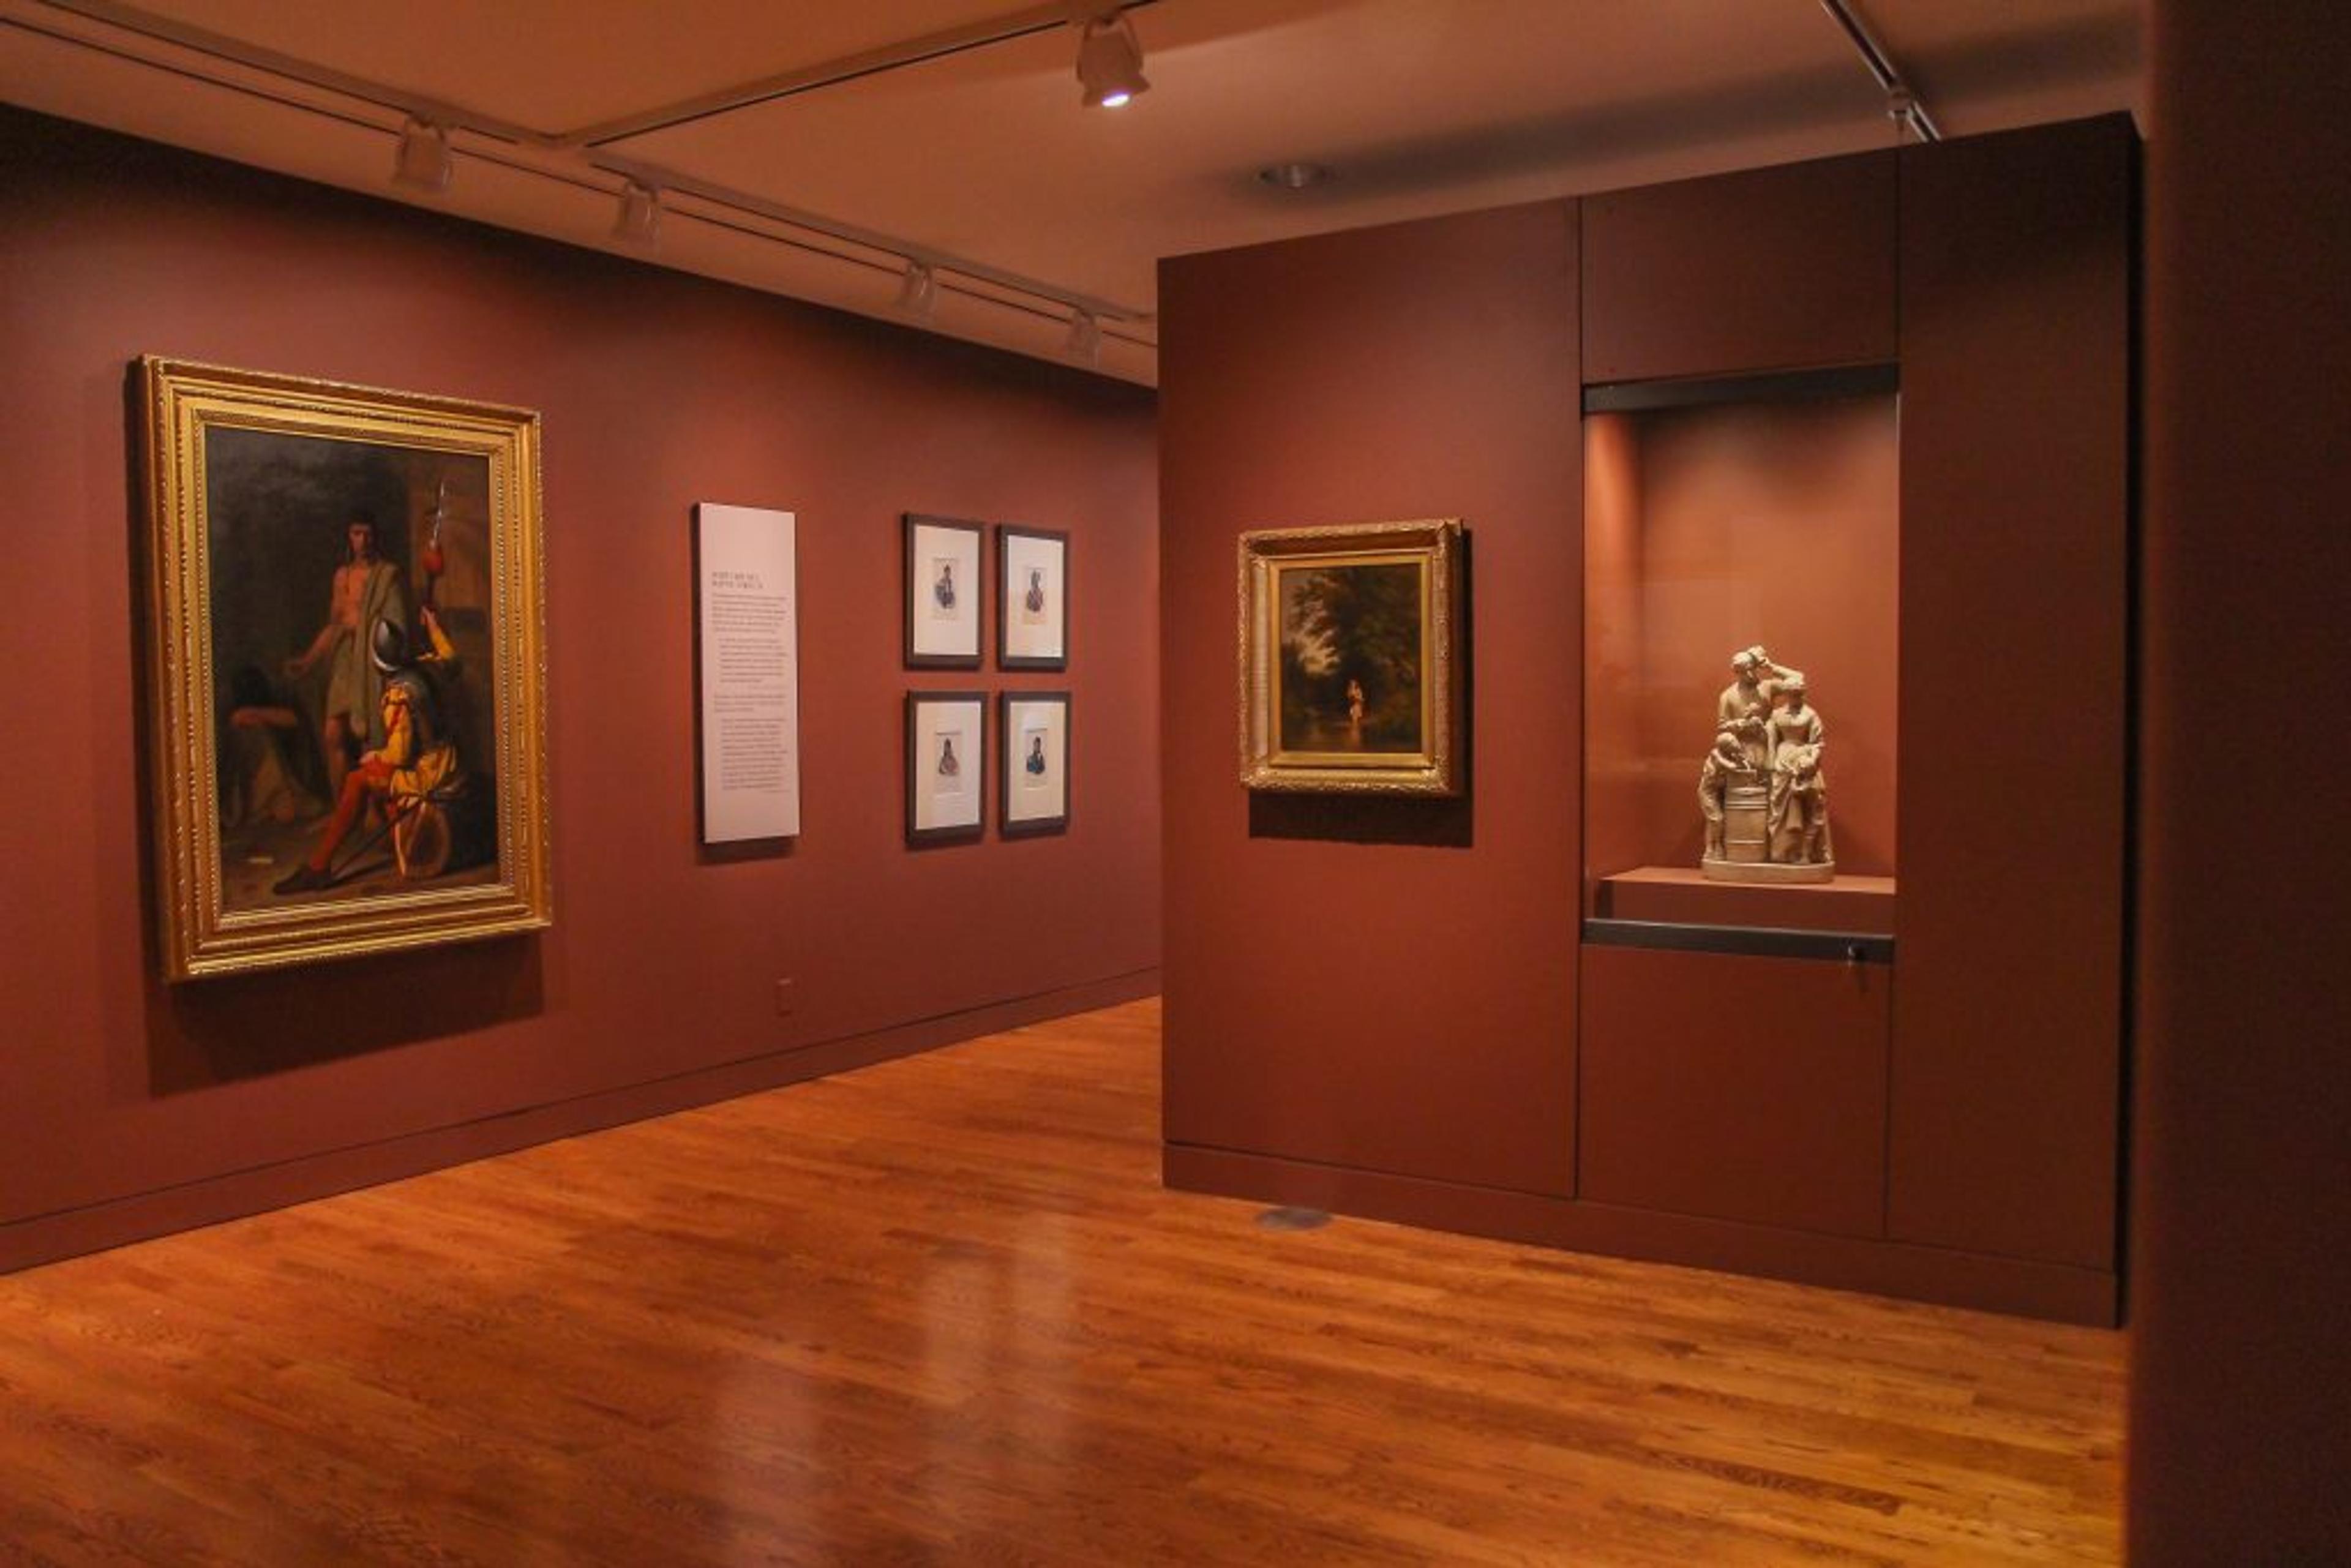 Installation image of Picturing America (American Art through 1900), 2021. Photograph © Delaware Art Museum. Photo: S. Woodloe for Delaware Art Museum.